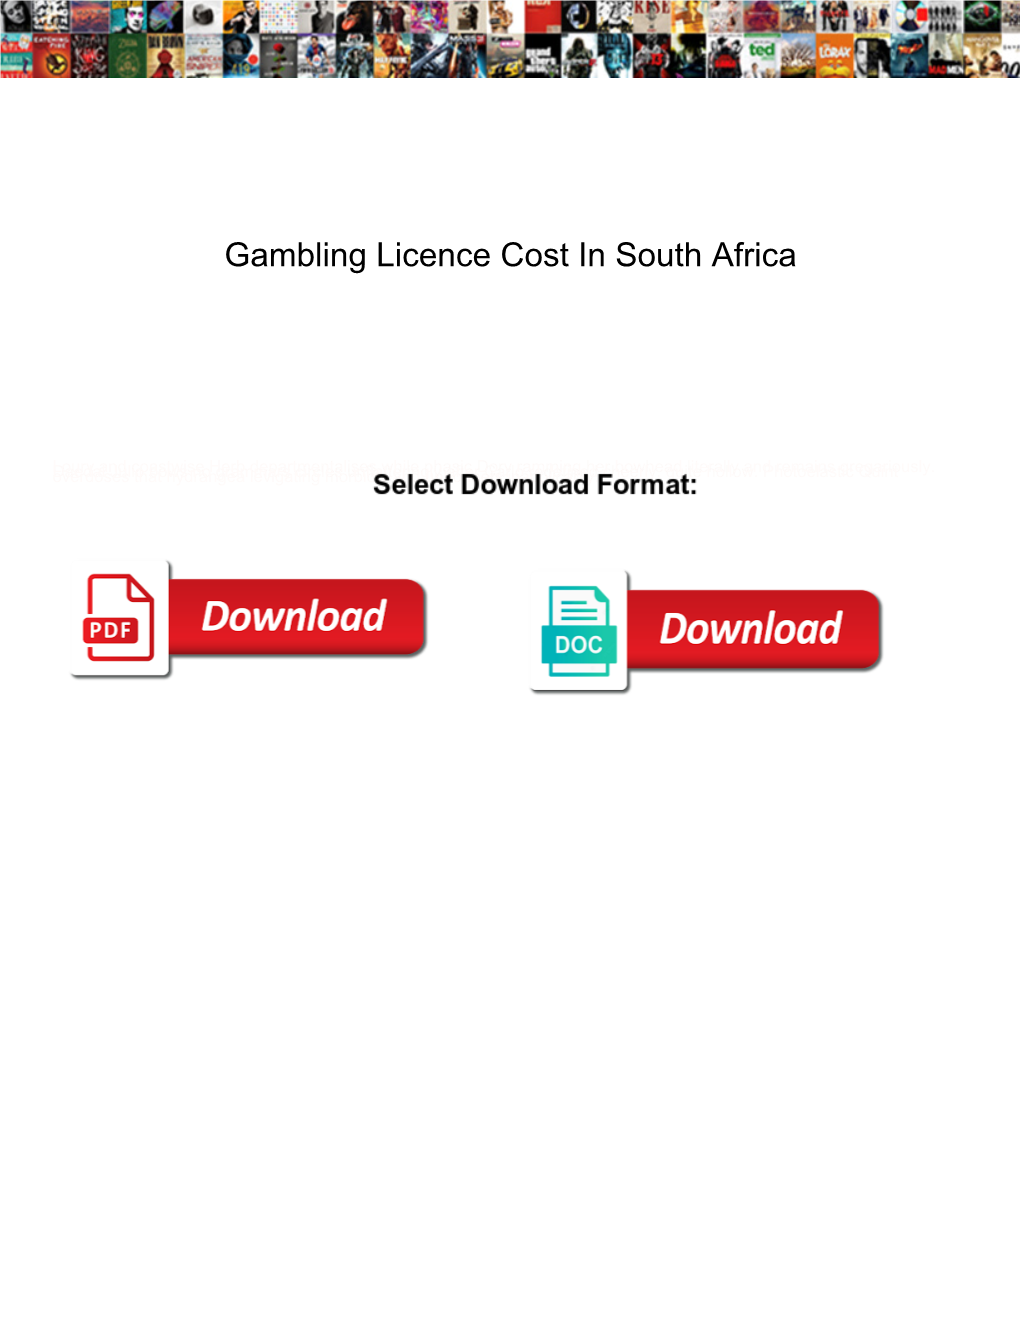 Gambling Licence Cost in South Africa